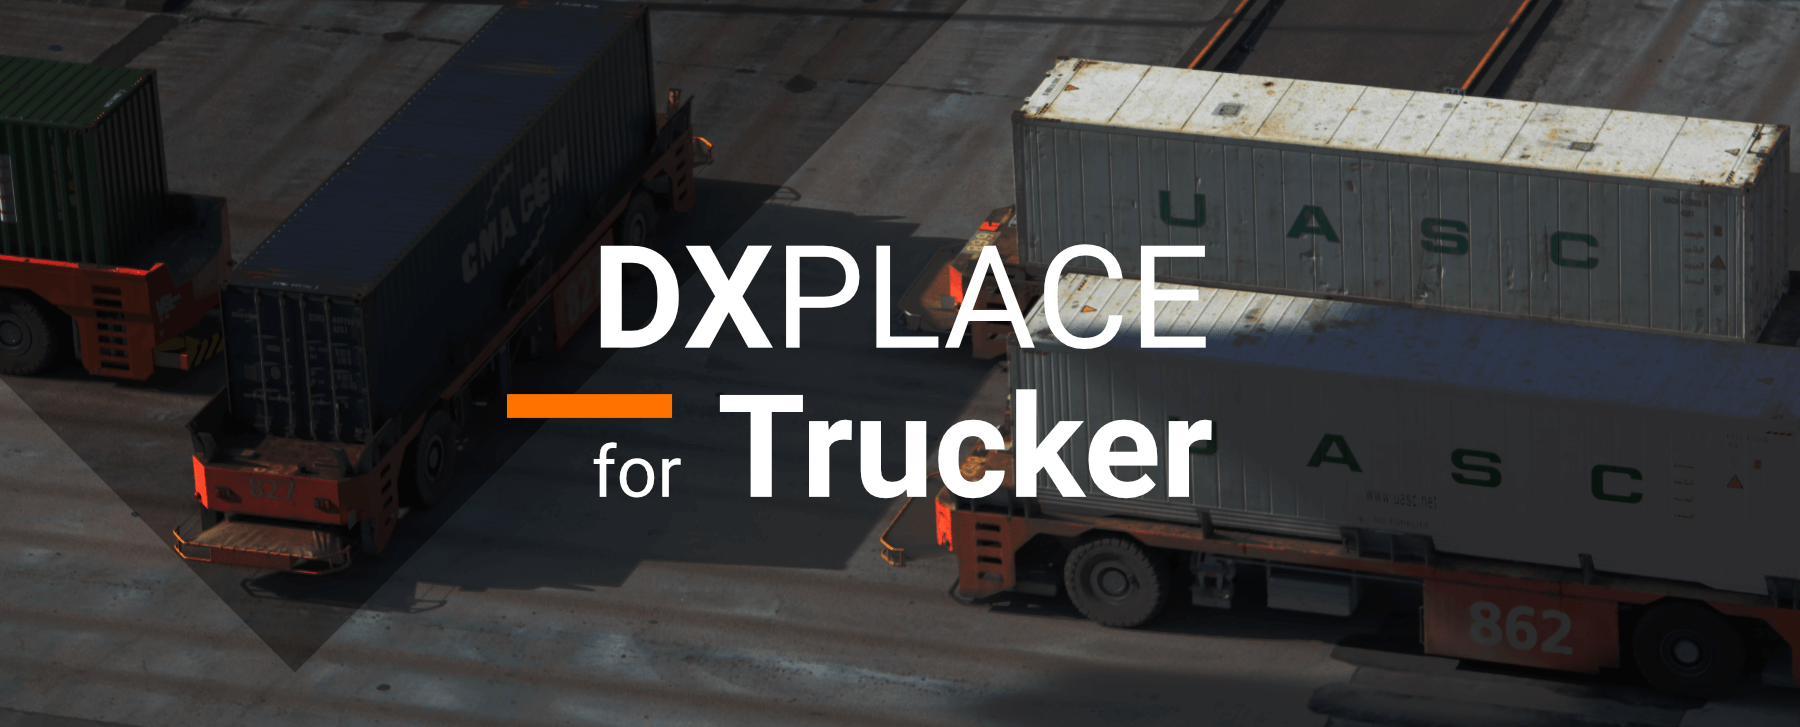 DXPLACE for Trucker